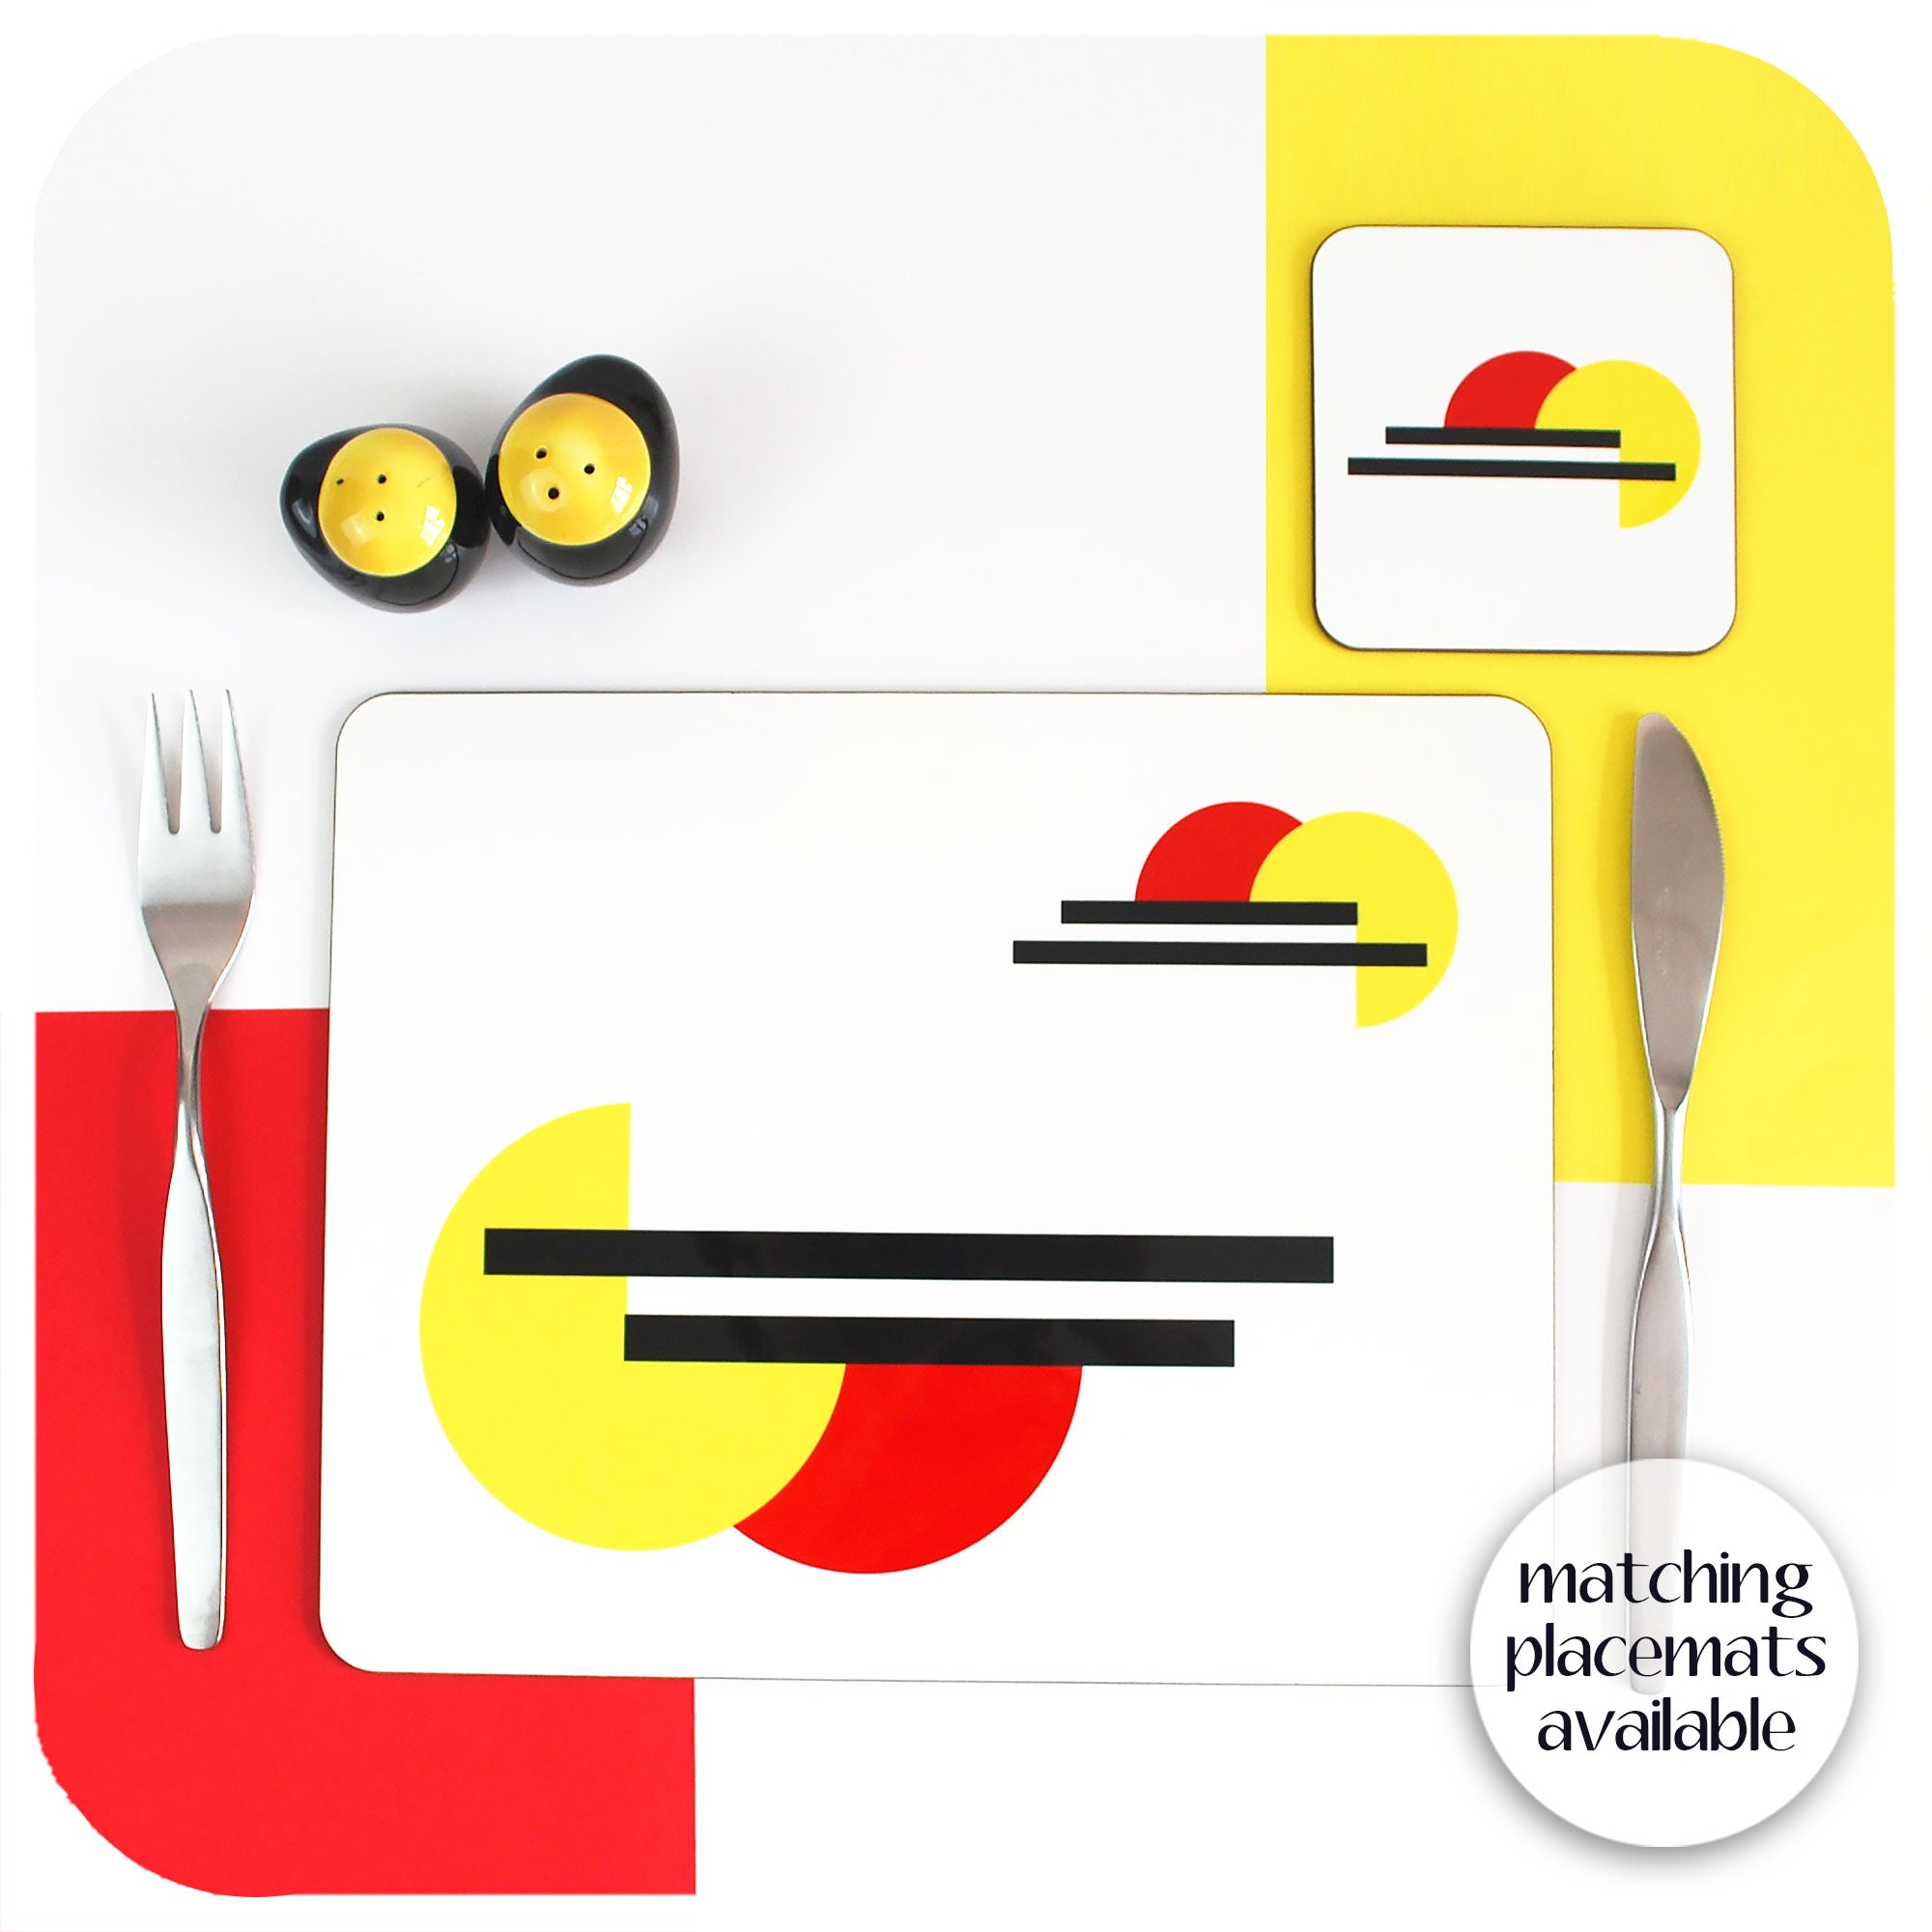 Bauhaus Placemat and matching Coaster, set on a table with vintage cutlery and cruet set | The Inkabilly Emporium | The Inkabilly Emporium